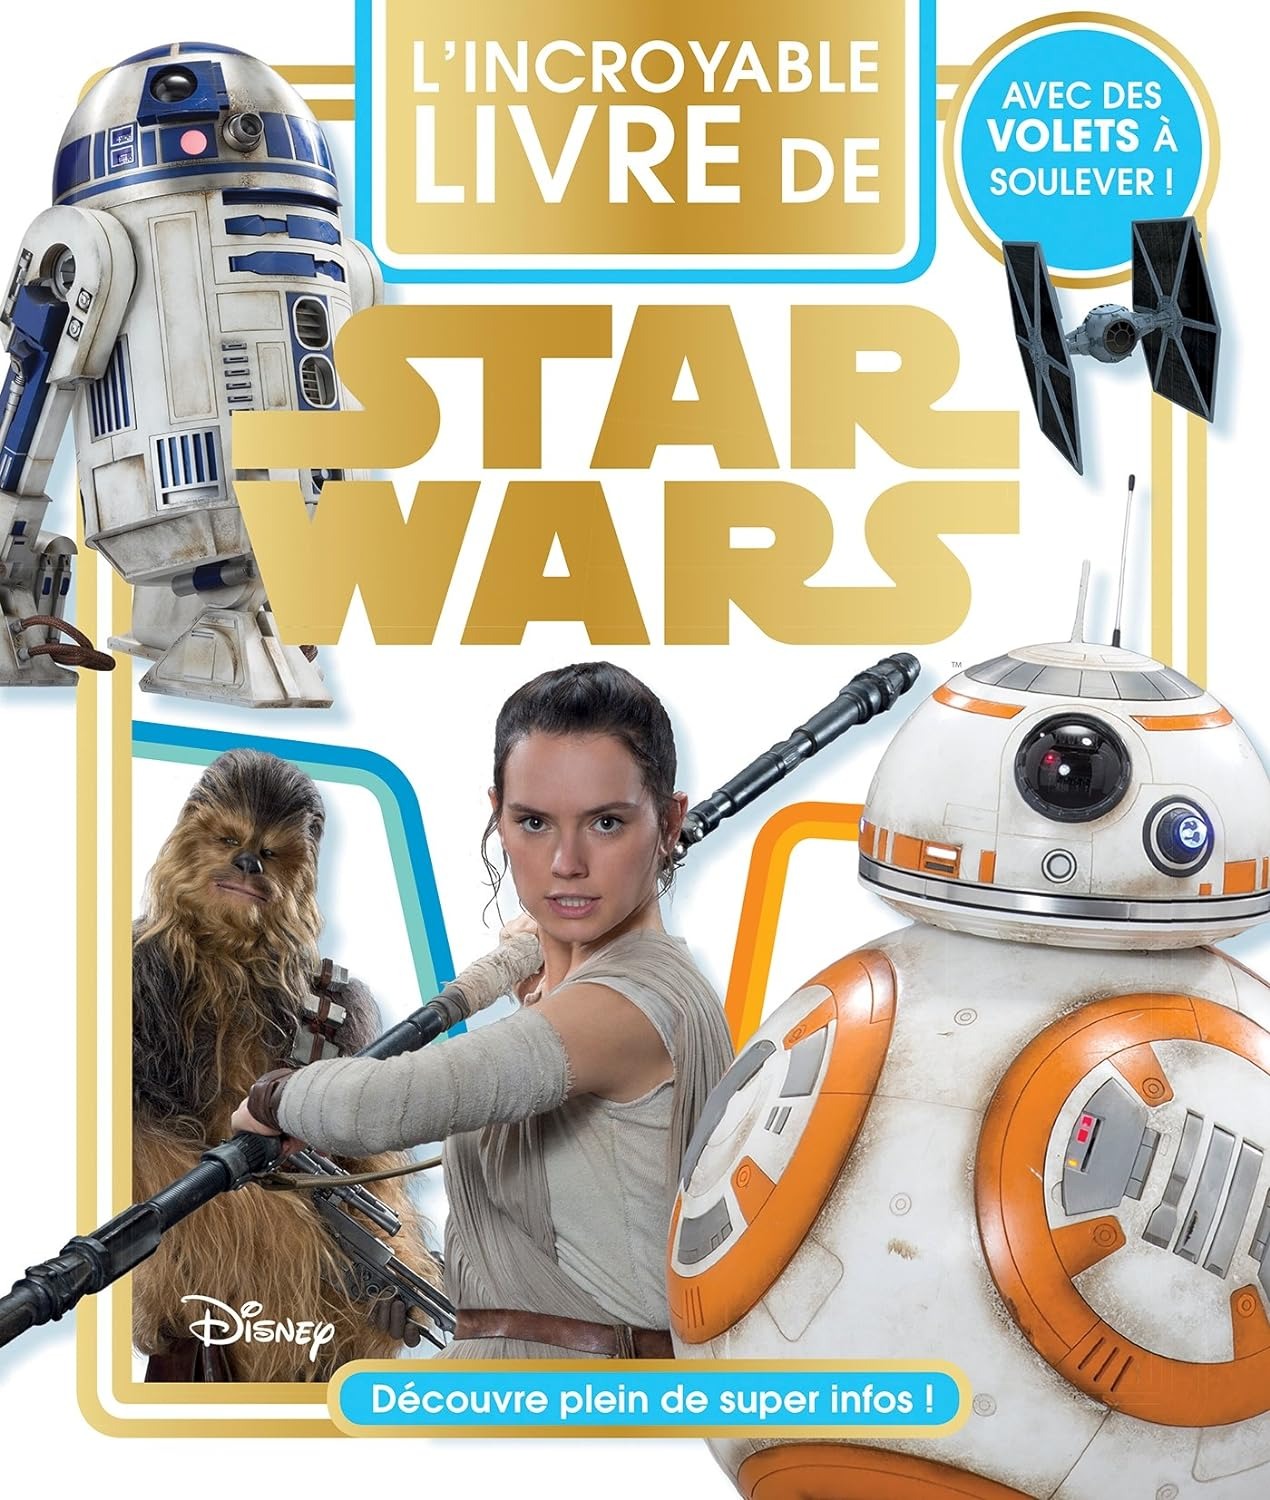 https://static.wikia.nocookie.net/frstarwars/images/1/10/L%27Incroyable_livre_couverture.jpg/revision/latest?cb=20231129152444